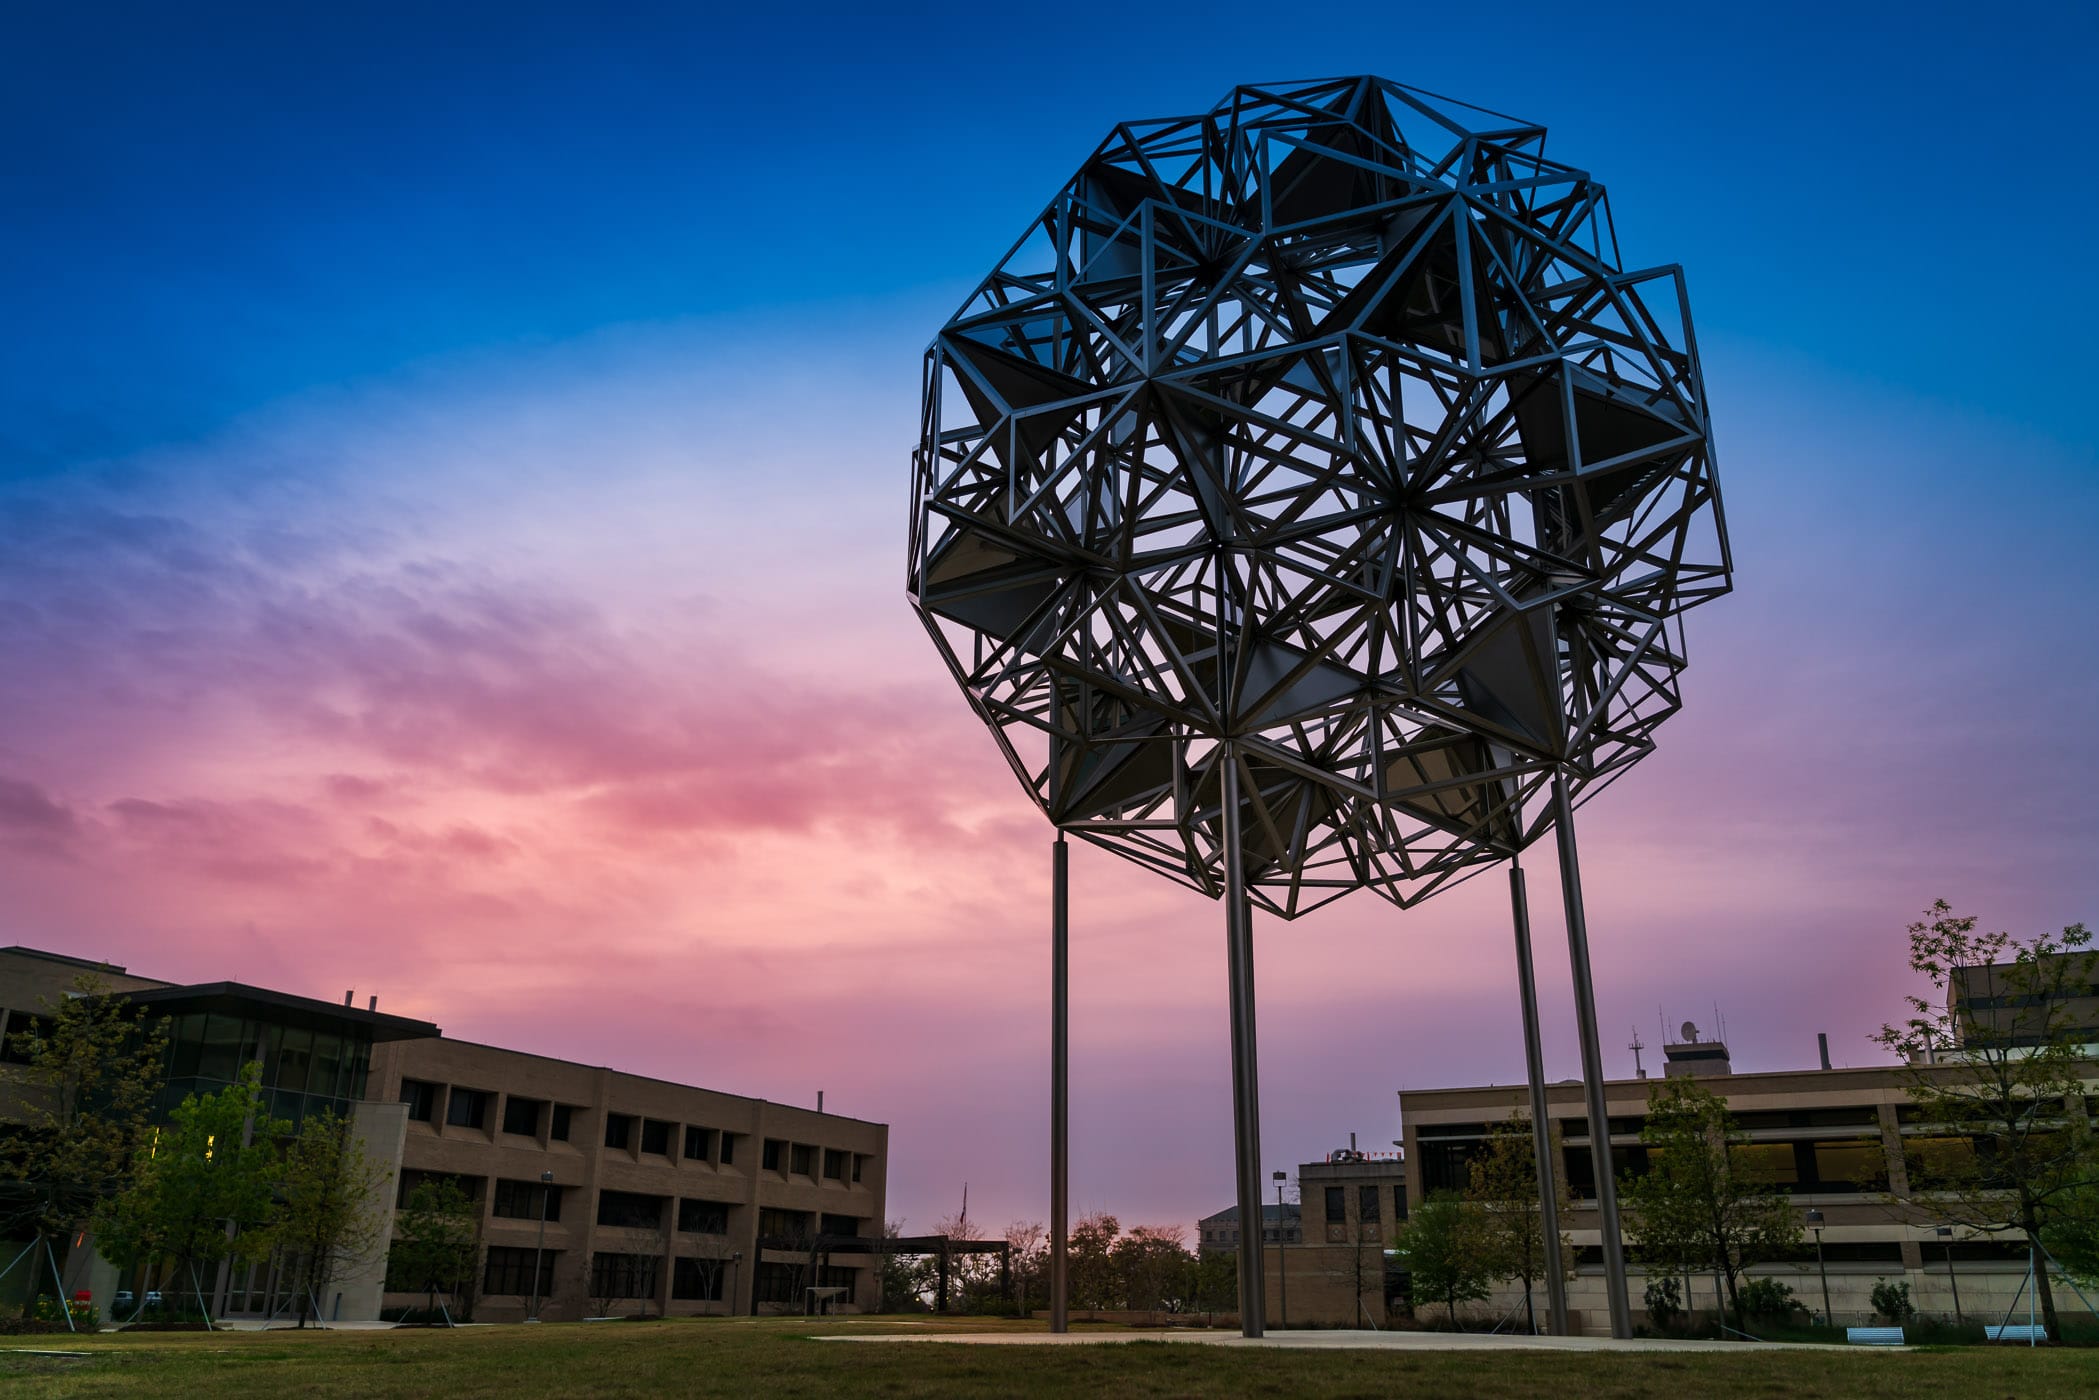 Sculptor Olafur Eliasson's "How to Build a Sphere Out of Cubes" on Texas A&M University's Engineering Quad.